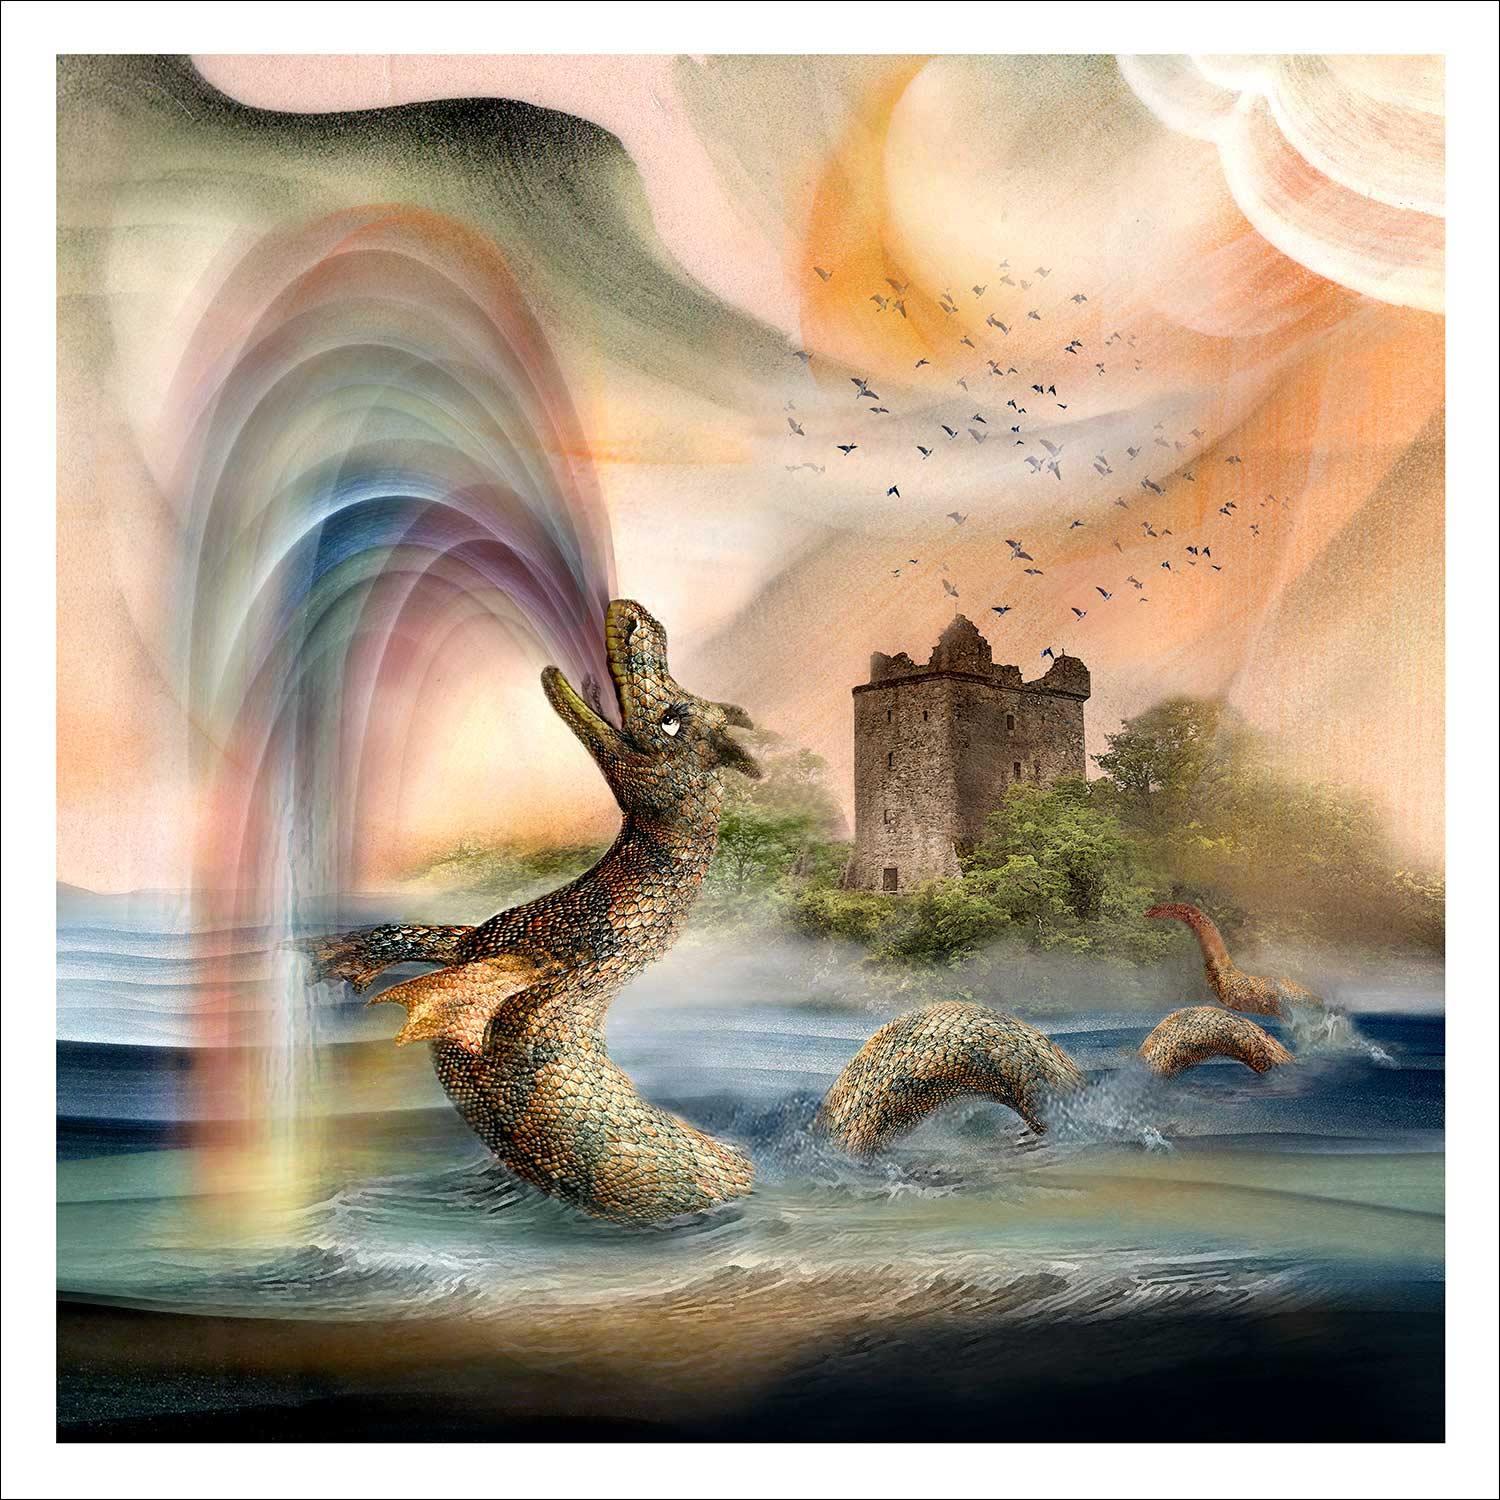 Nessie visits Urquhart Castle Art Print from an original painting by artist Esther Cohen